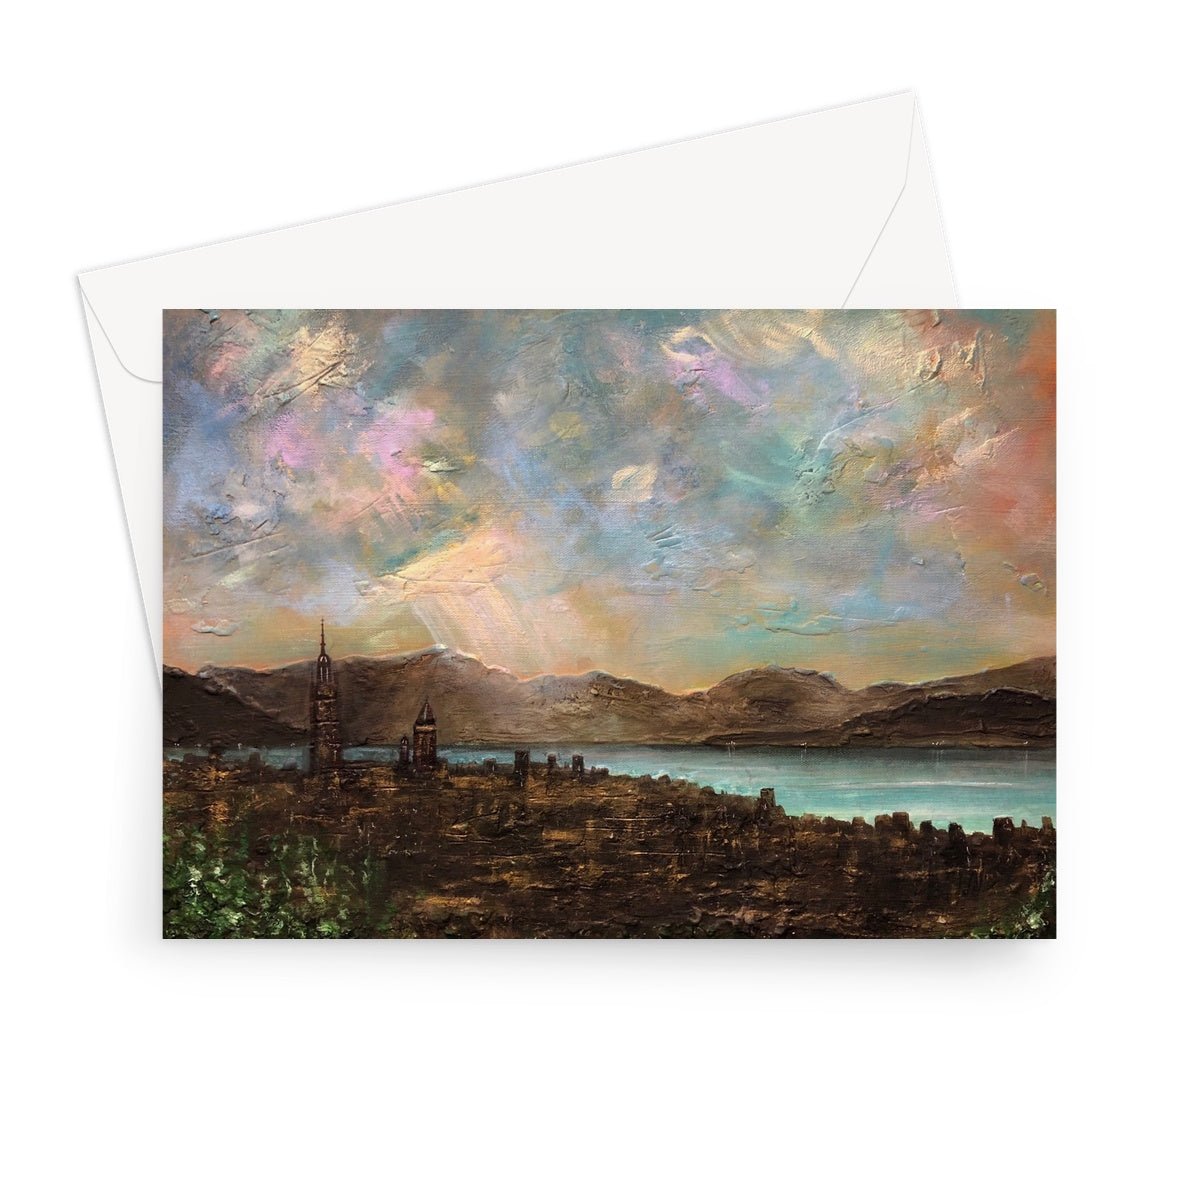 Angels Fingers Over Greenock Art Gifts Greeting Card-Greetings Cards-River Clyde Art Gallery-7"x5"-10 Cards-Paintings, Prints, Homeware, Art Gifts From Scotland By Scottish Artist Kevin Hunter